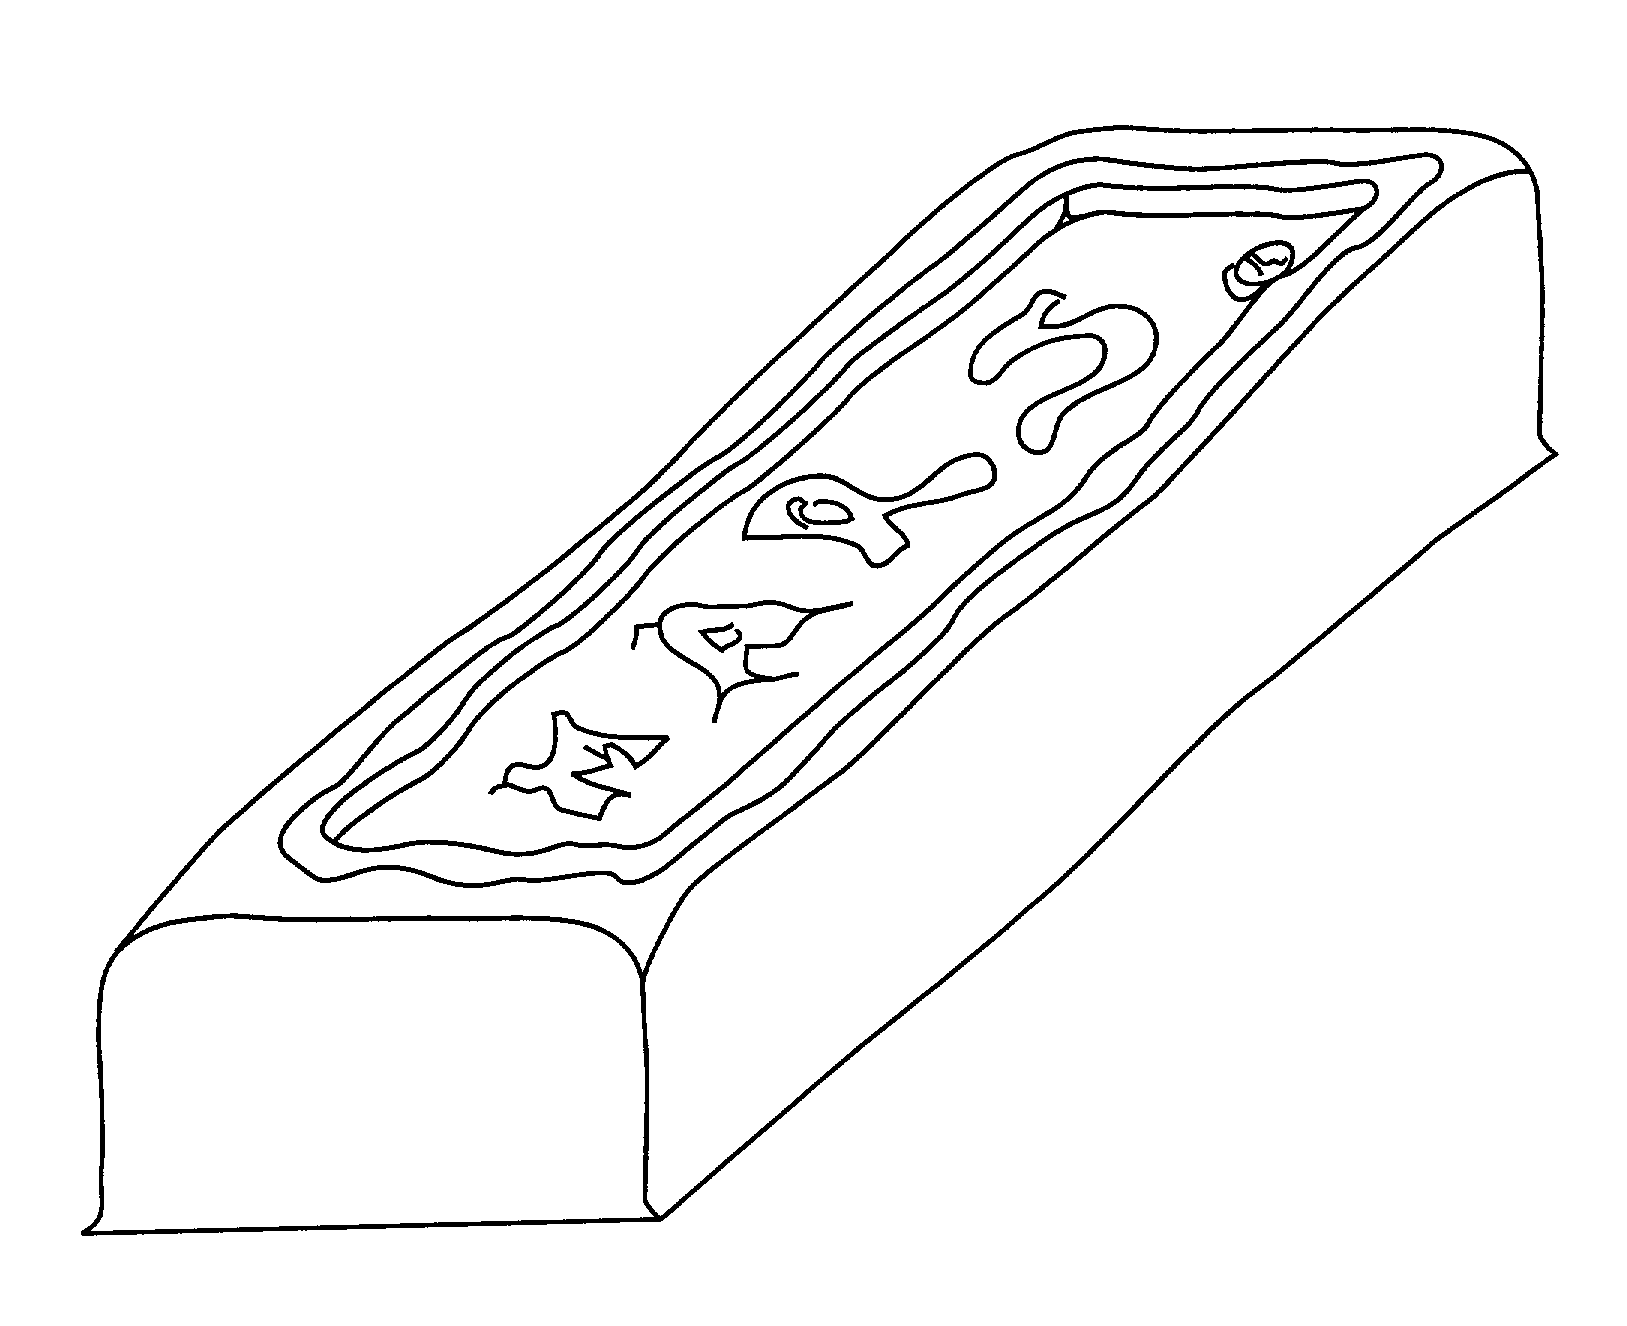 Method of embossing chocolate products